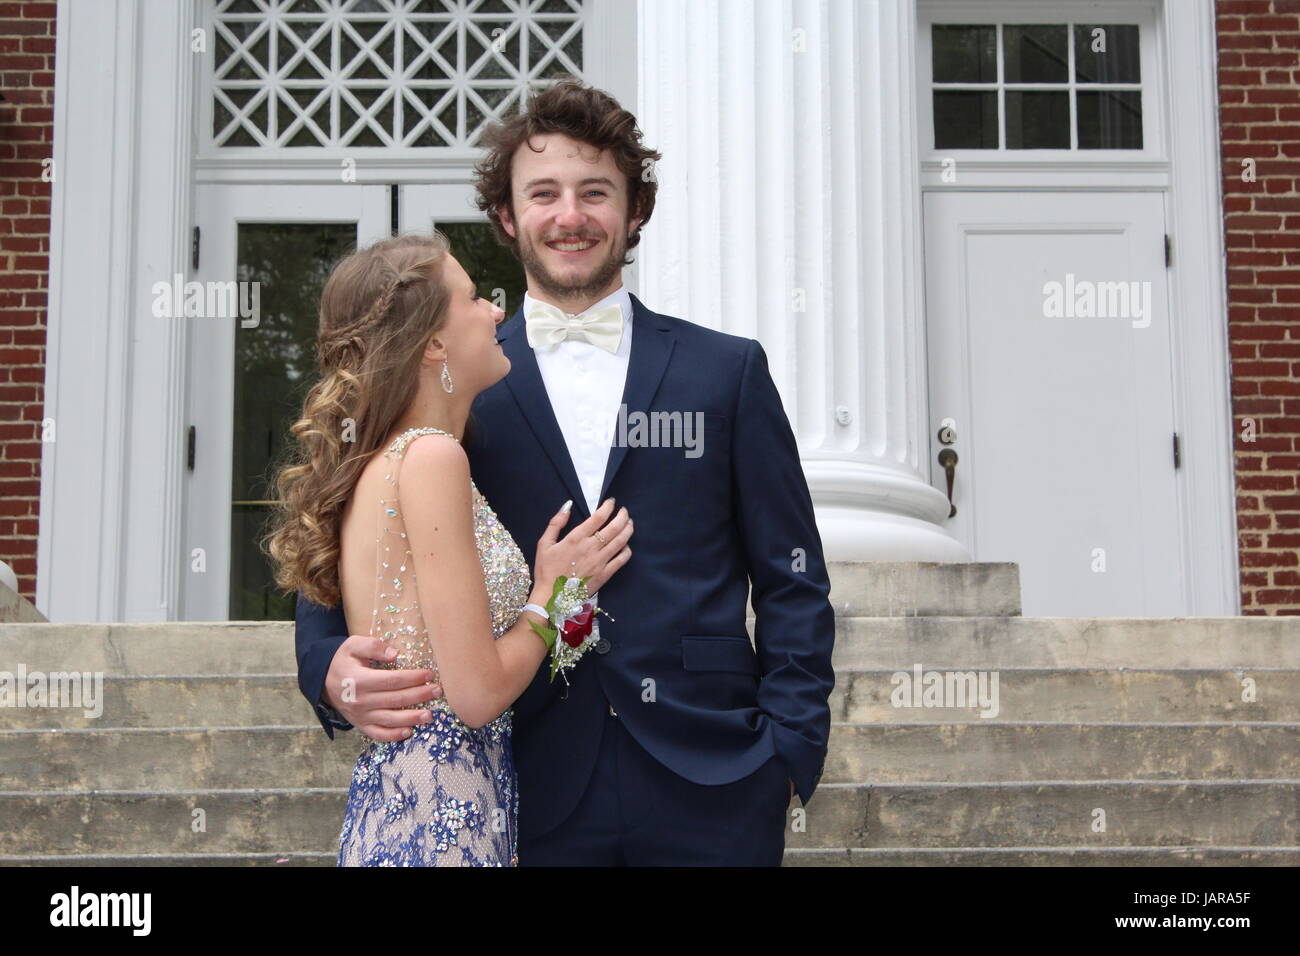 Young Couple Going To High School Prom Stock Photo